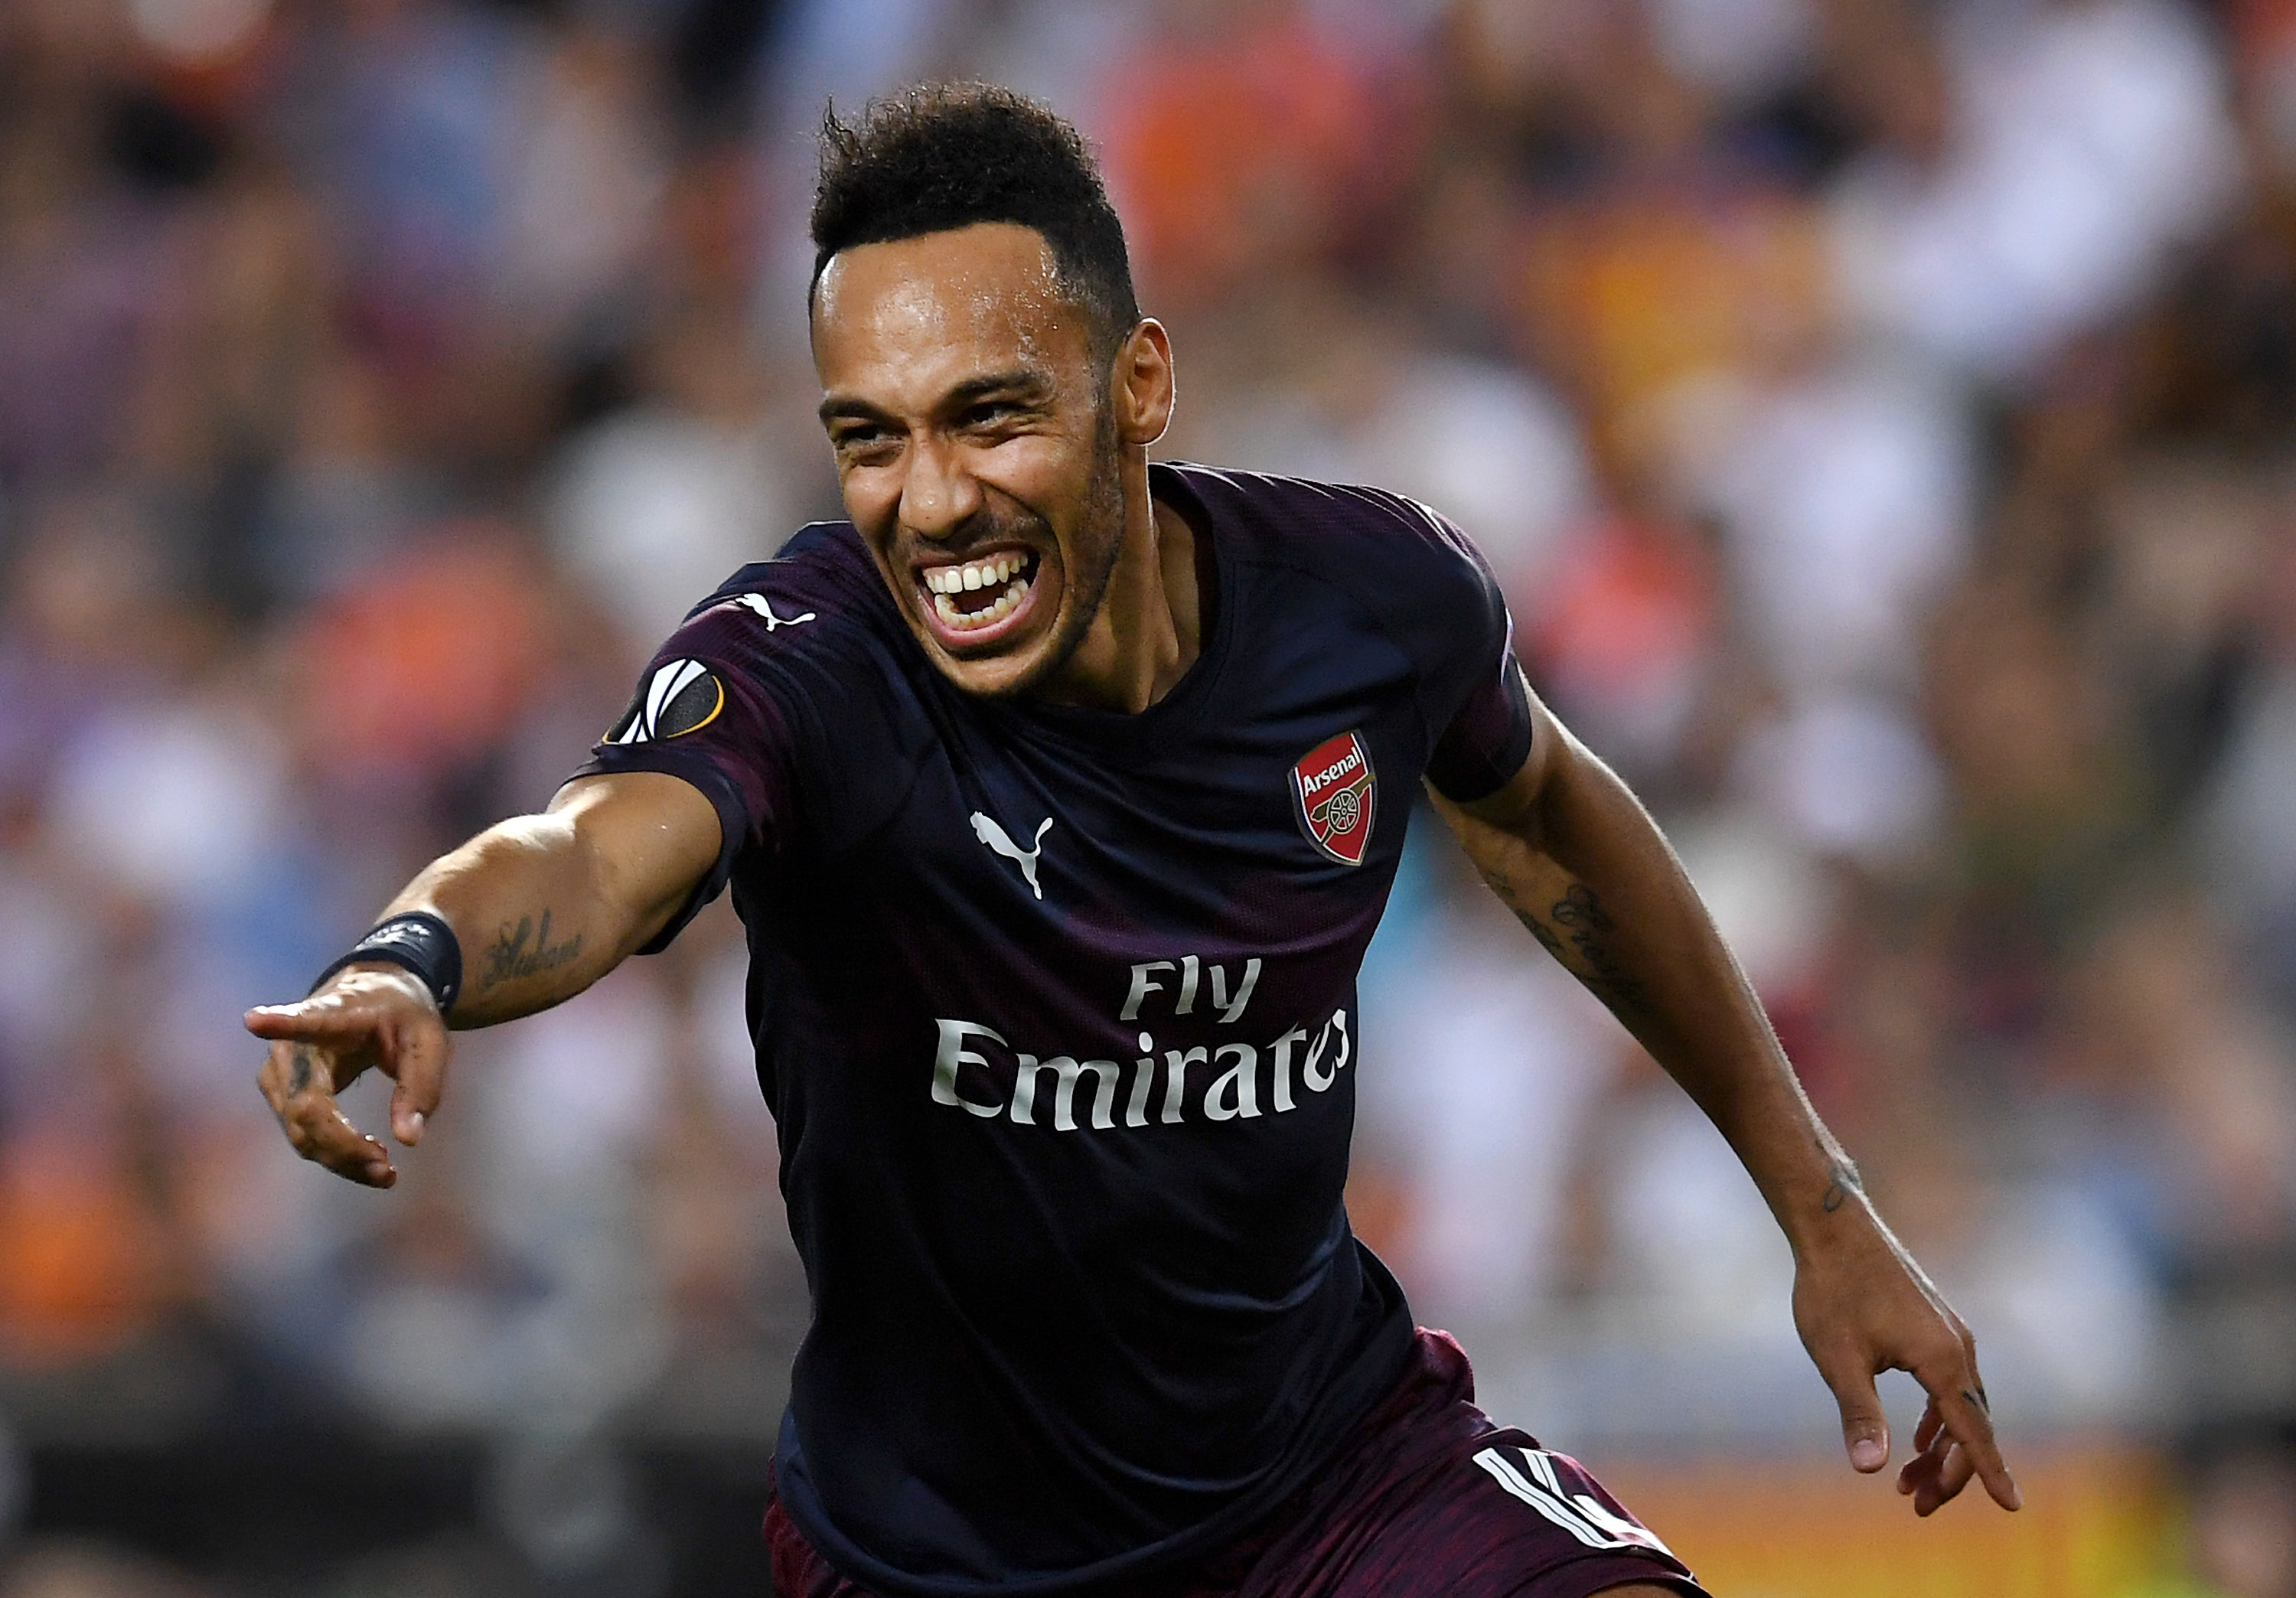 Aubameyang reaffirms his commitment to Arsenal amid links to other clubs. (Photo courtesy: AFP/Getty)